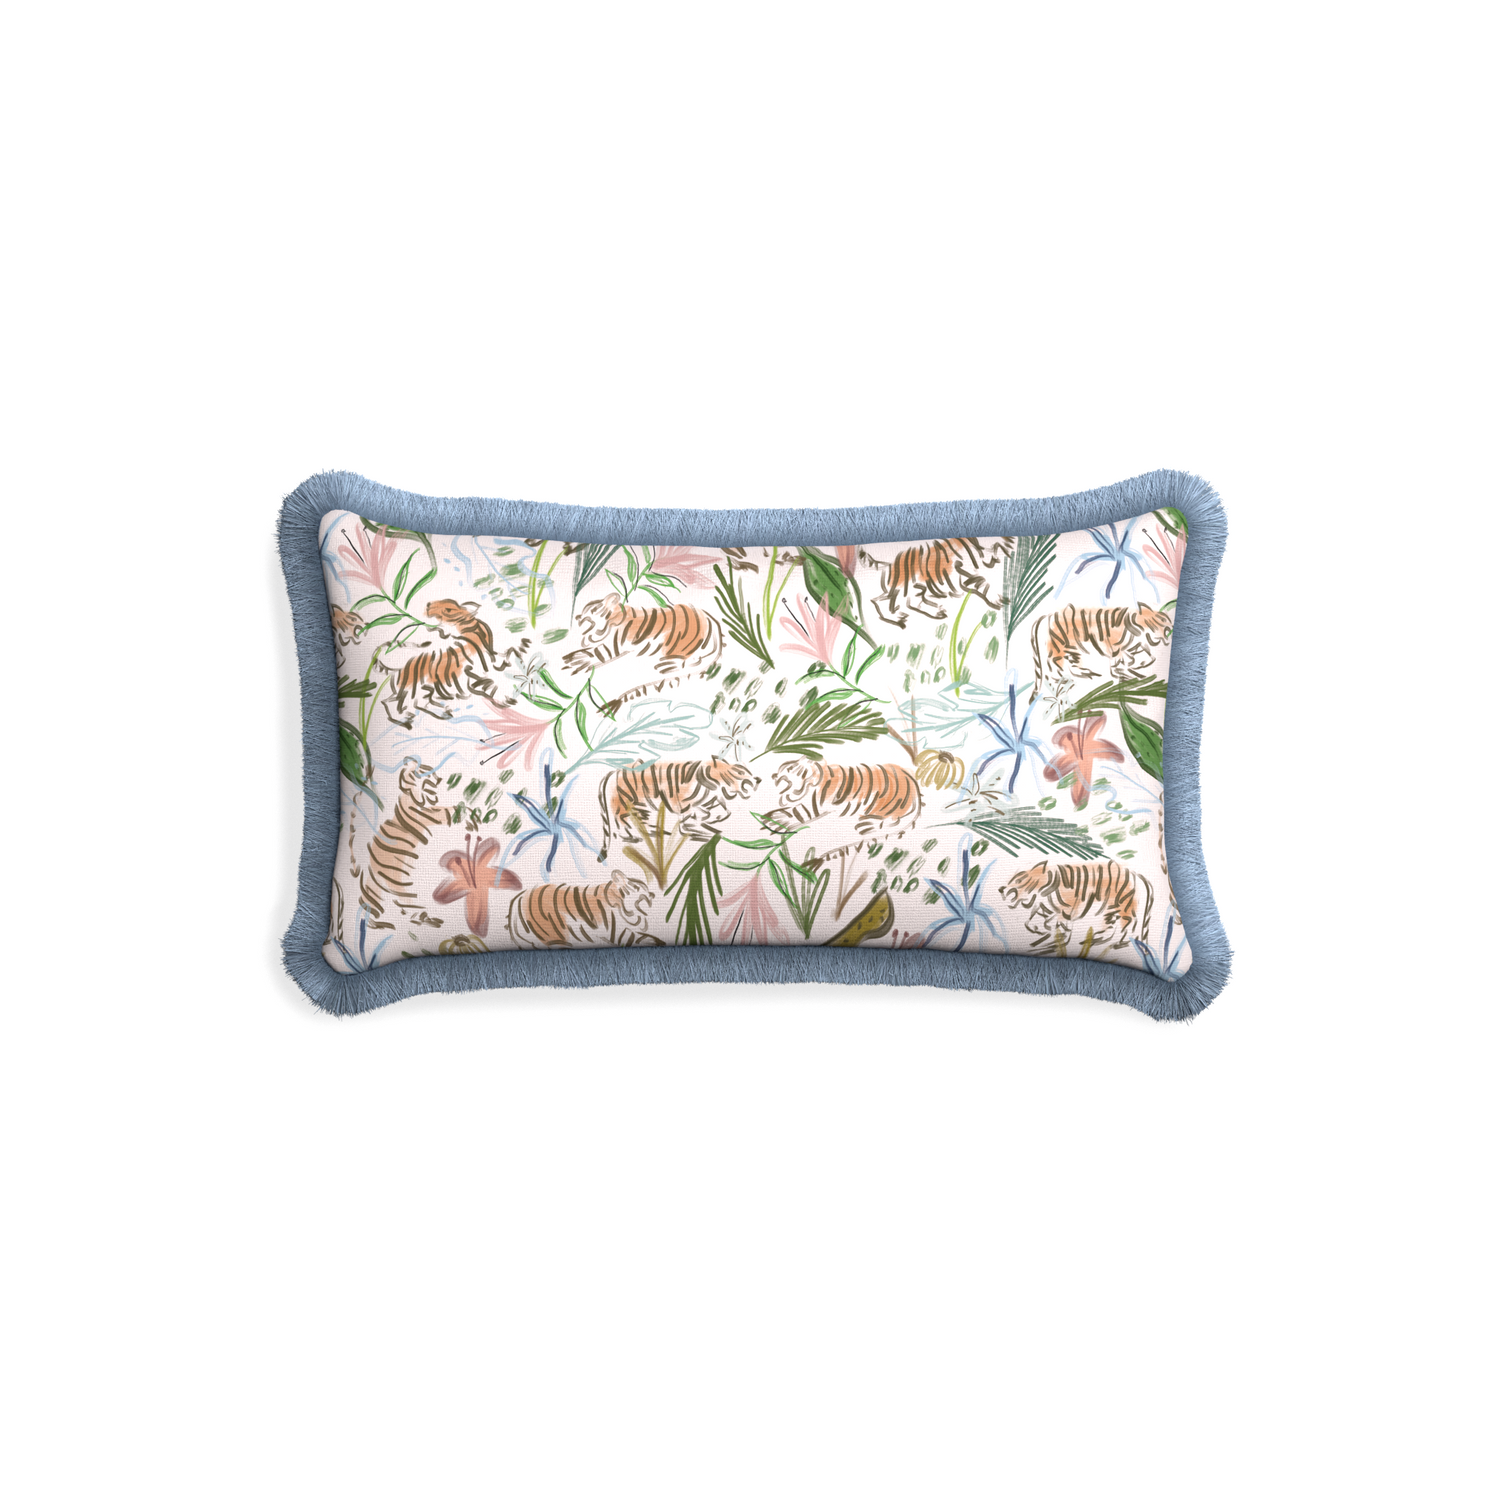 Petite-lumbar frida pink custom pink chinoiserie tigerpillow with sky fringe on white background